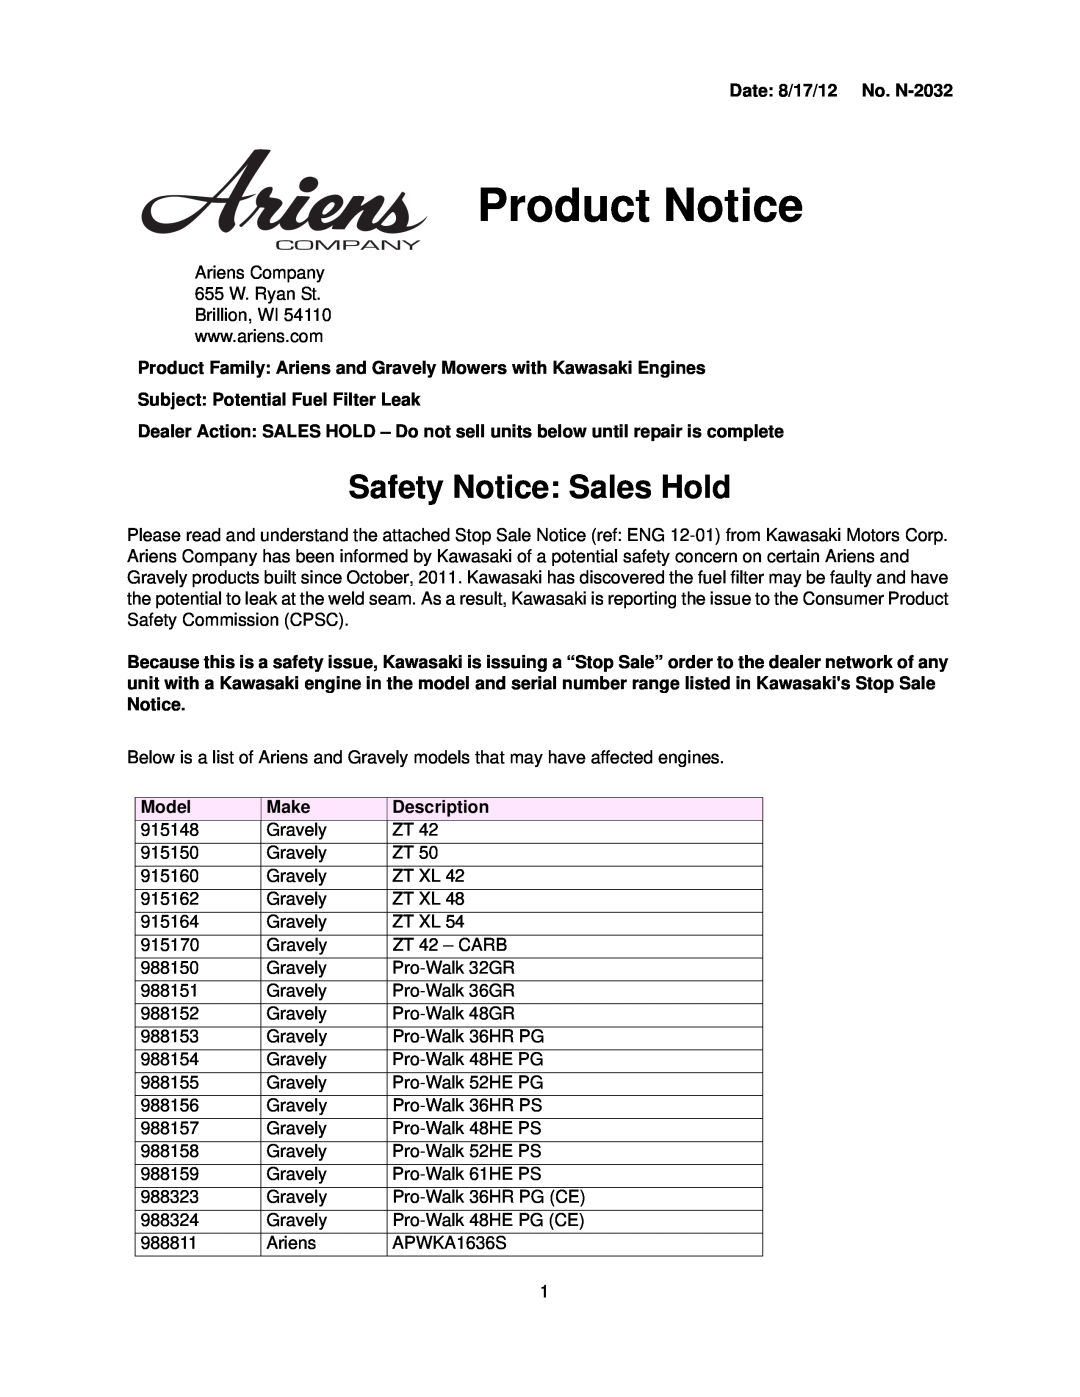 Ariens 915162 GRAVELY ZT XL 48 manual Product Notice, Safety Notice Sales Hold, Date 8/17/12 No. N-2032, Model, Make 